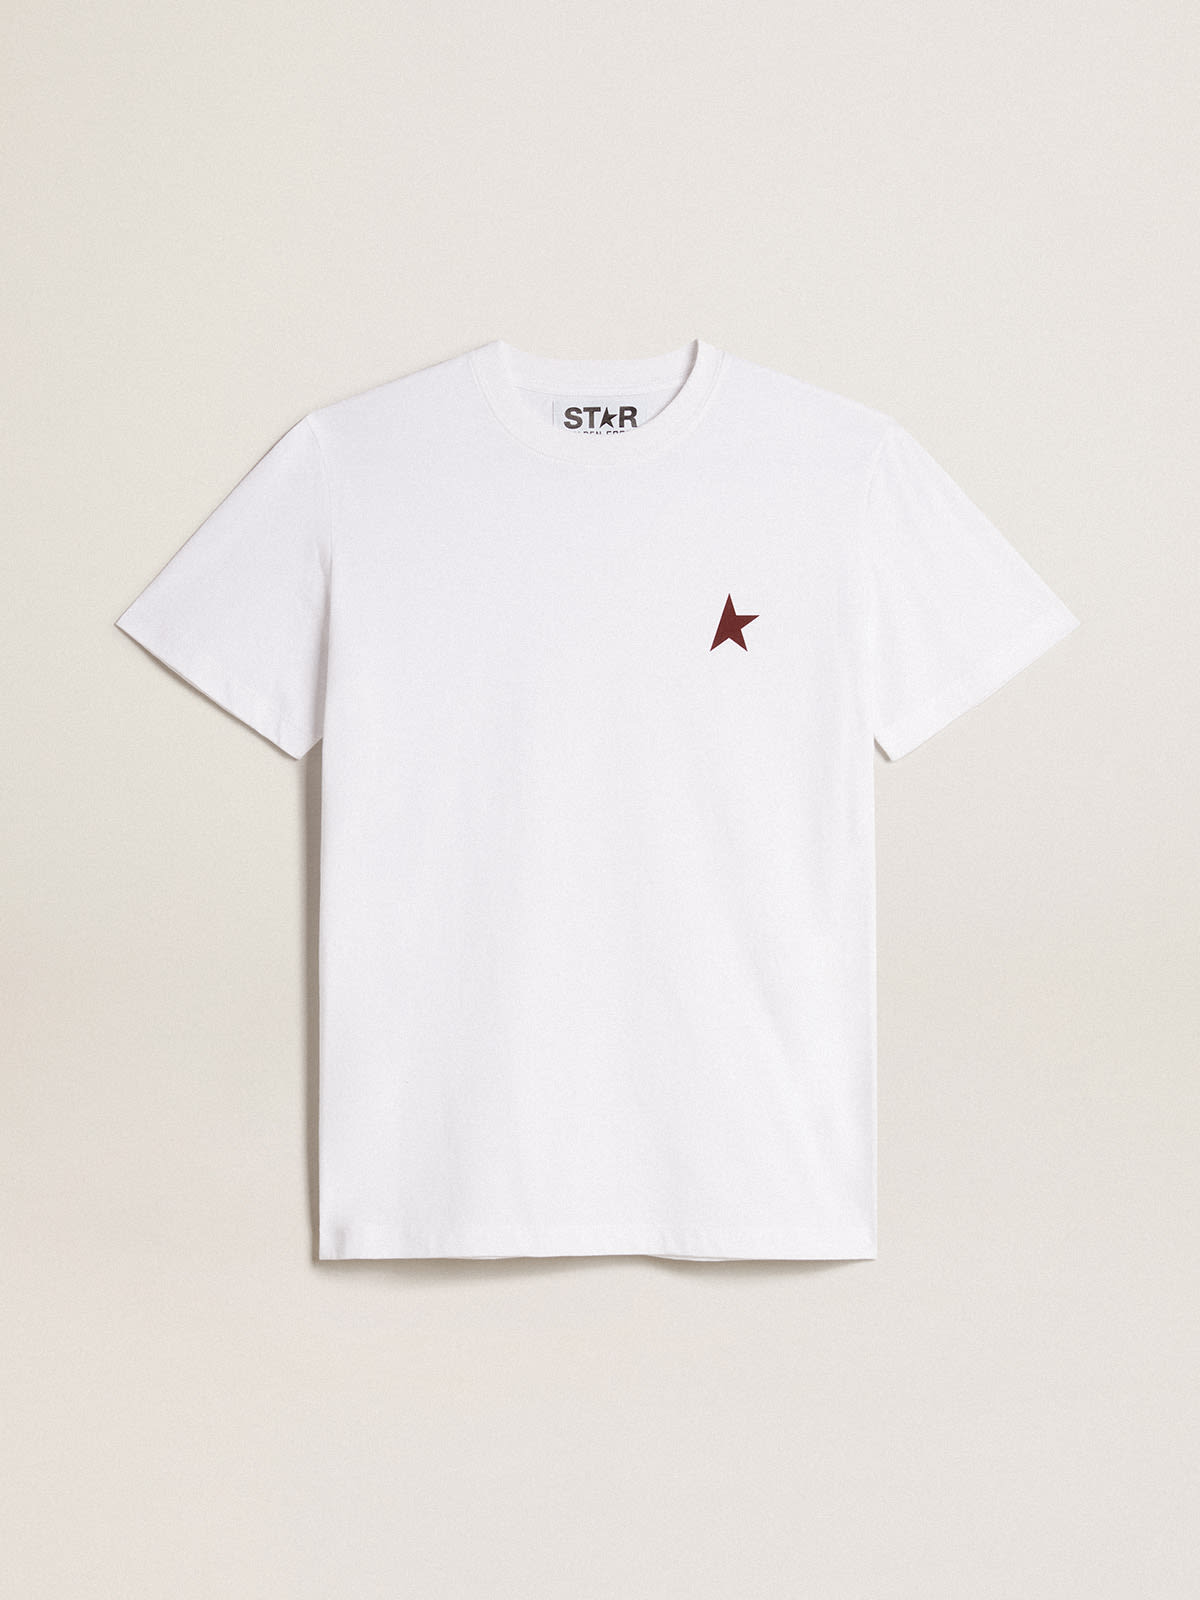 Golden Goose - Women’s white T-shirt with burgundy star on the front in 